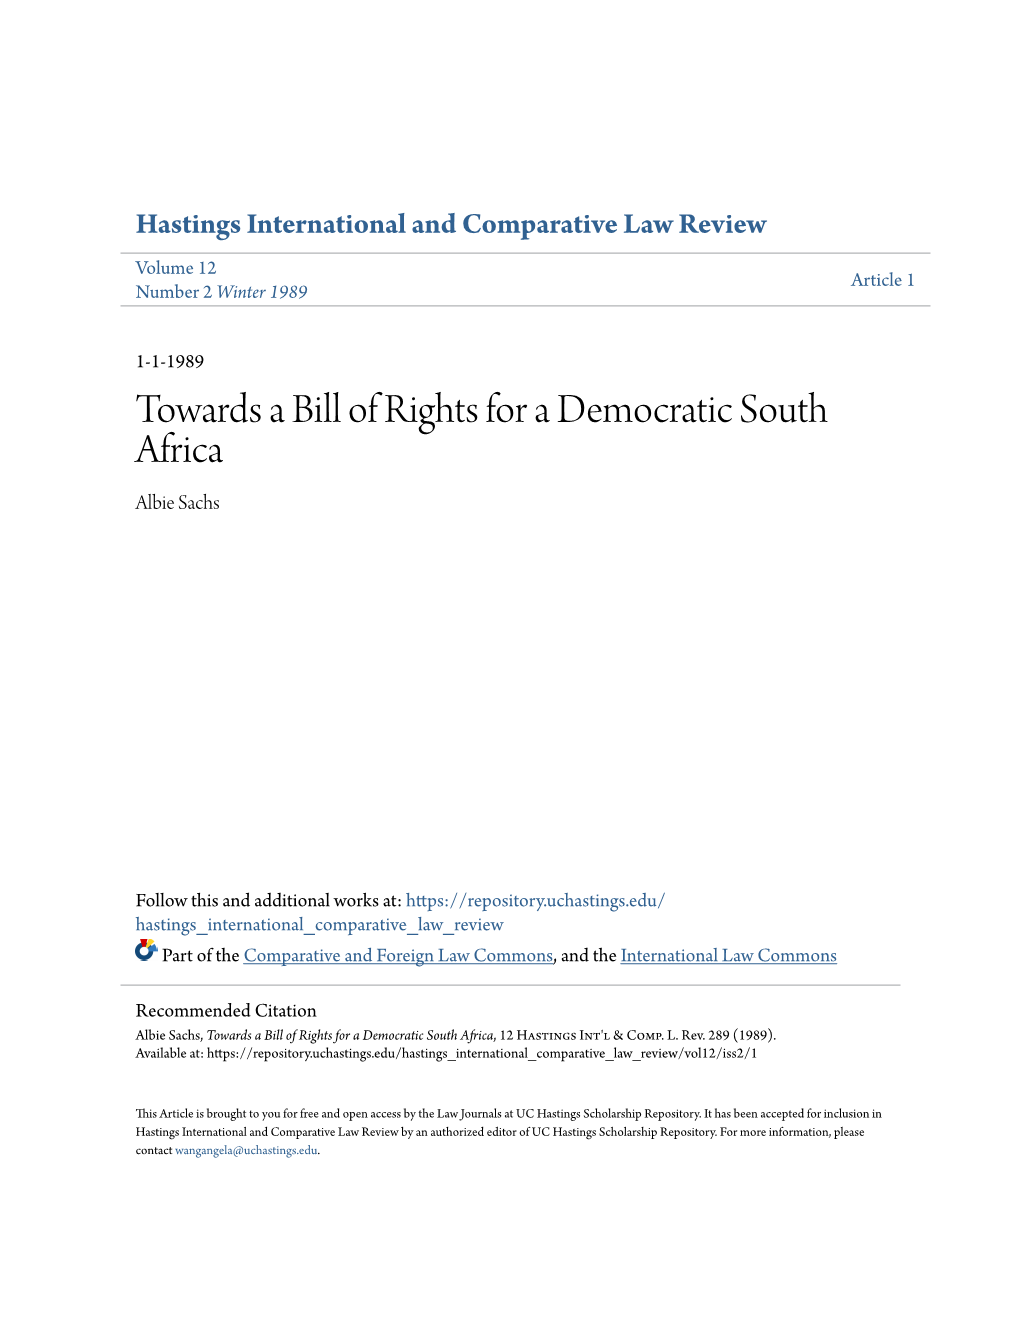 Towards a Bill of Rights for a Democratic South Africa Albie Sachs